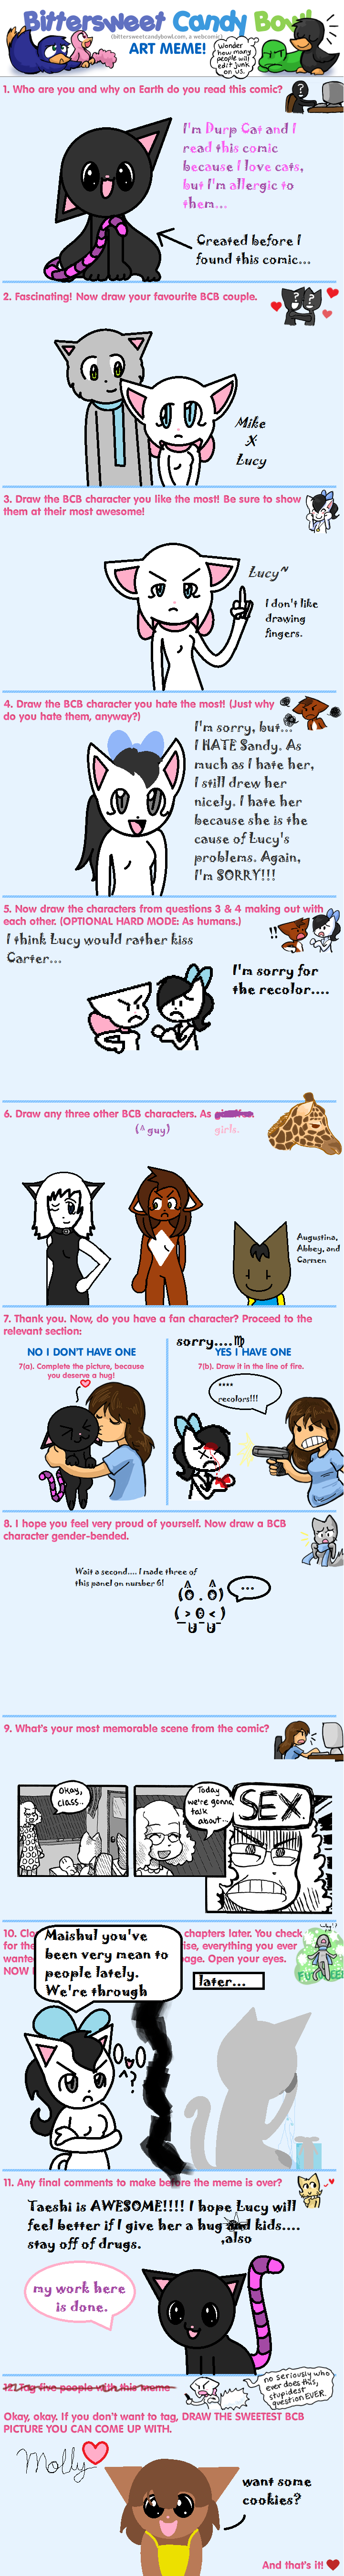 Candybooru image #5996, tagged with Abbey Augustus BCB_Art_Meme Carter DurpCat_(Artist) MikexLucy Molly Sandy